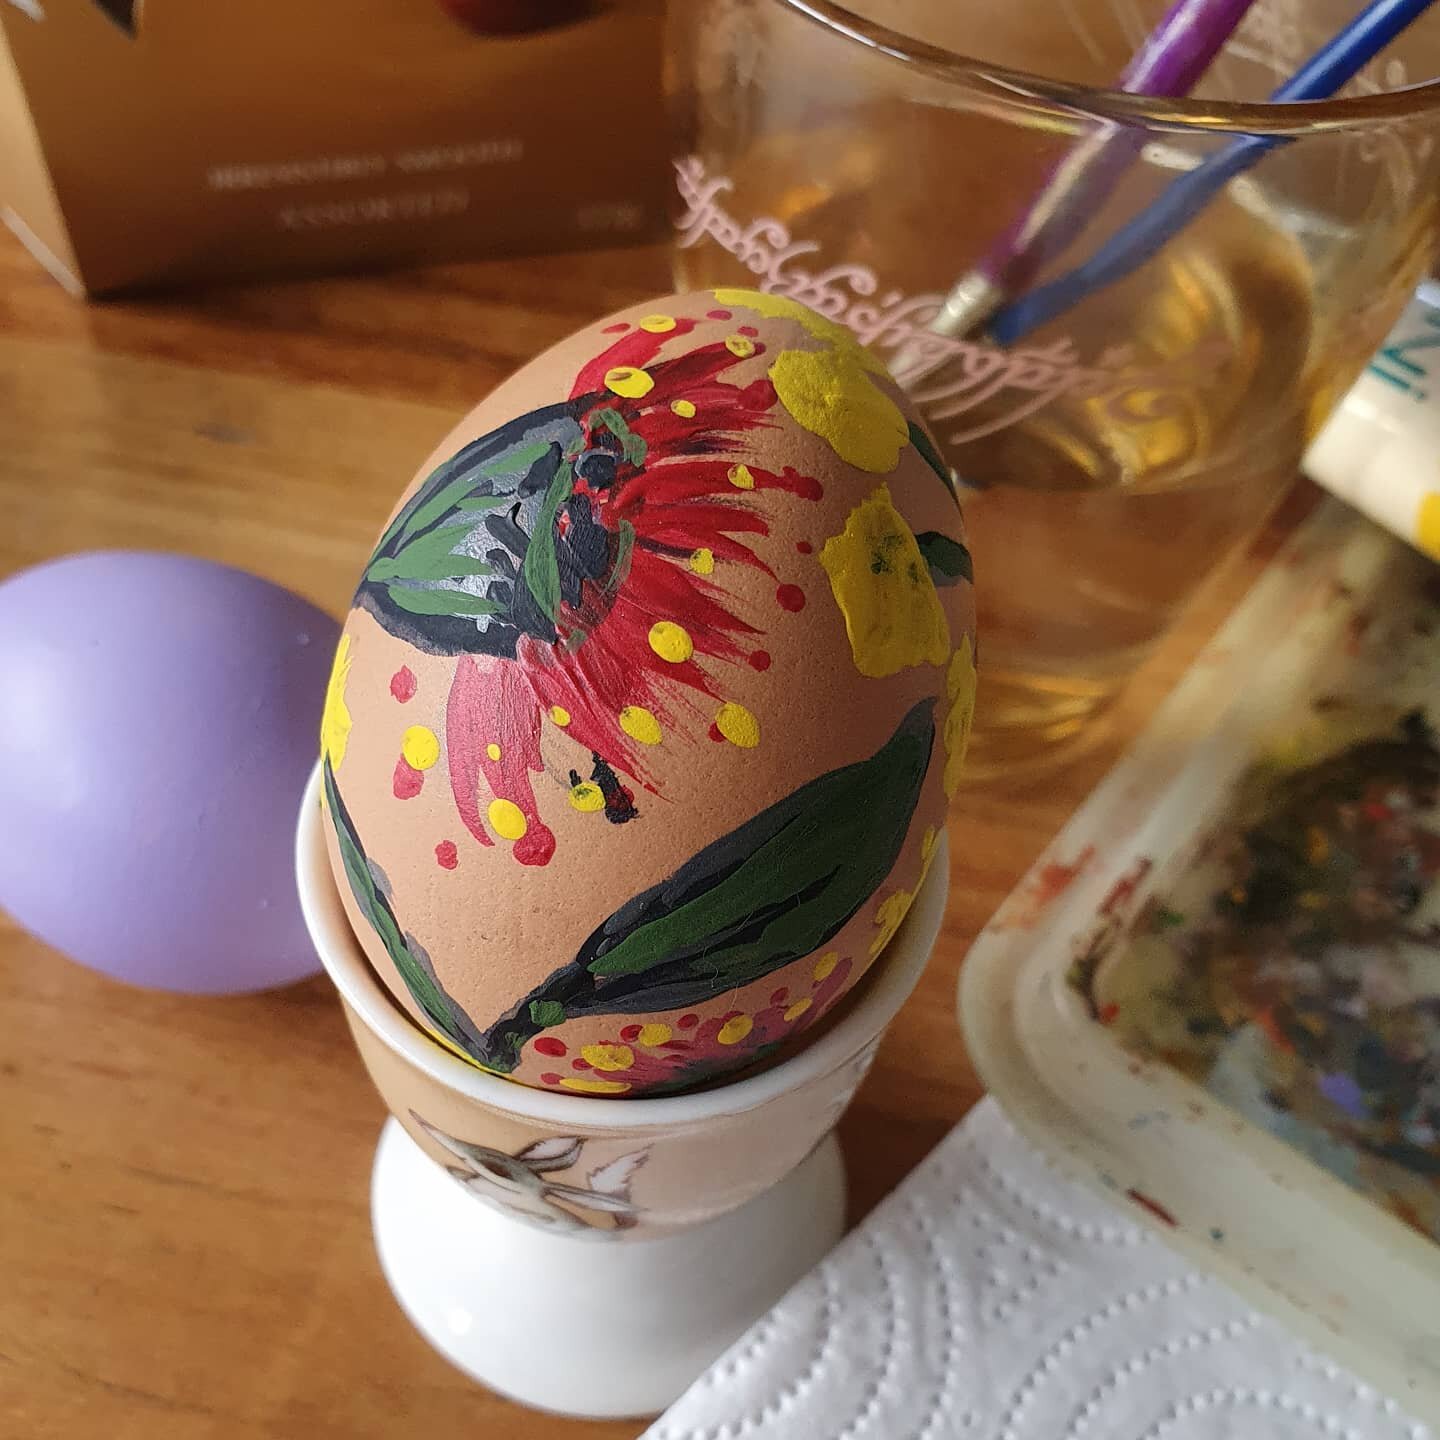 Happy Easter! Painting Eggs, still more details to go and my lavender egg to paint next. Will post pics of finished eggs! 
.
.
.
.
#easter #painting #paintingeggs #eastereggs #eastereggpainting #australian #floral #australiannatives #gumleaves #gumnu